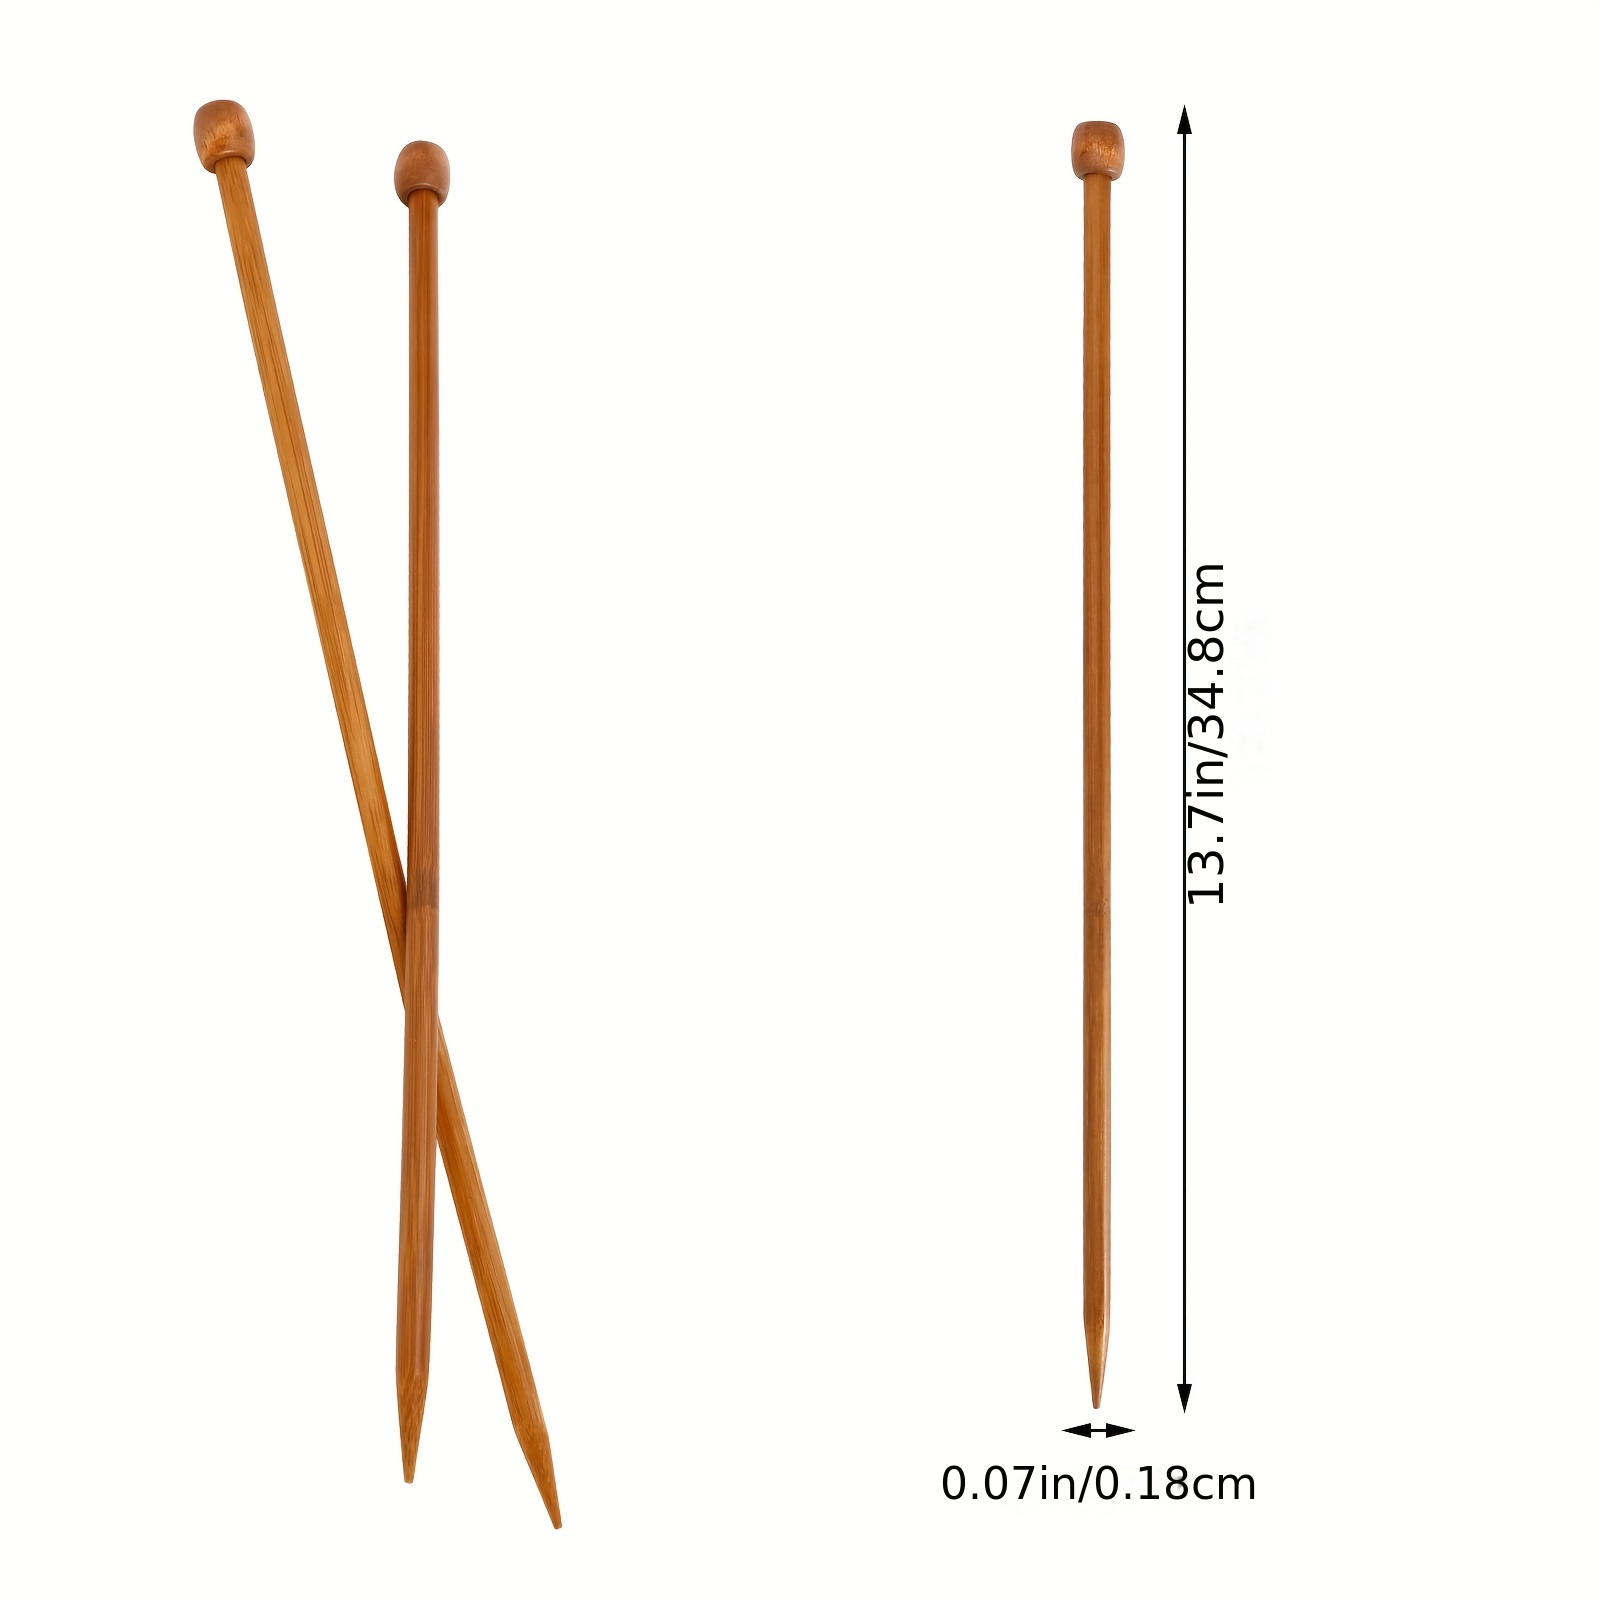 Mdoker Bamboo Knitting Needle Straight Single Pointed Sweater Knitting  Needles 10-inch Length for Handmade DIY Knitting Projects,Size US 2.5(3mm)